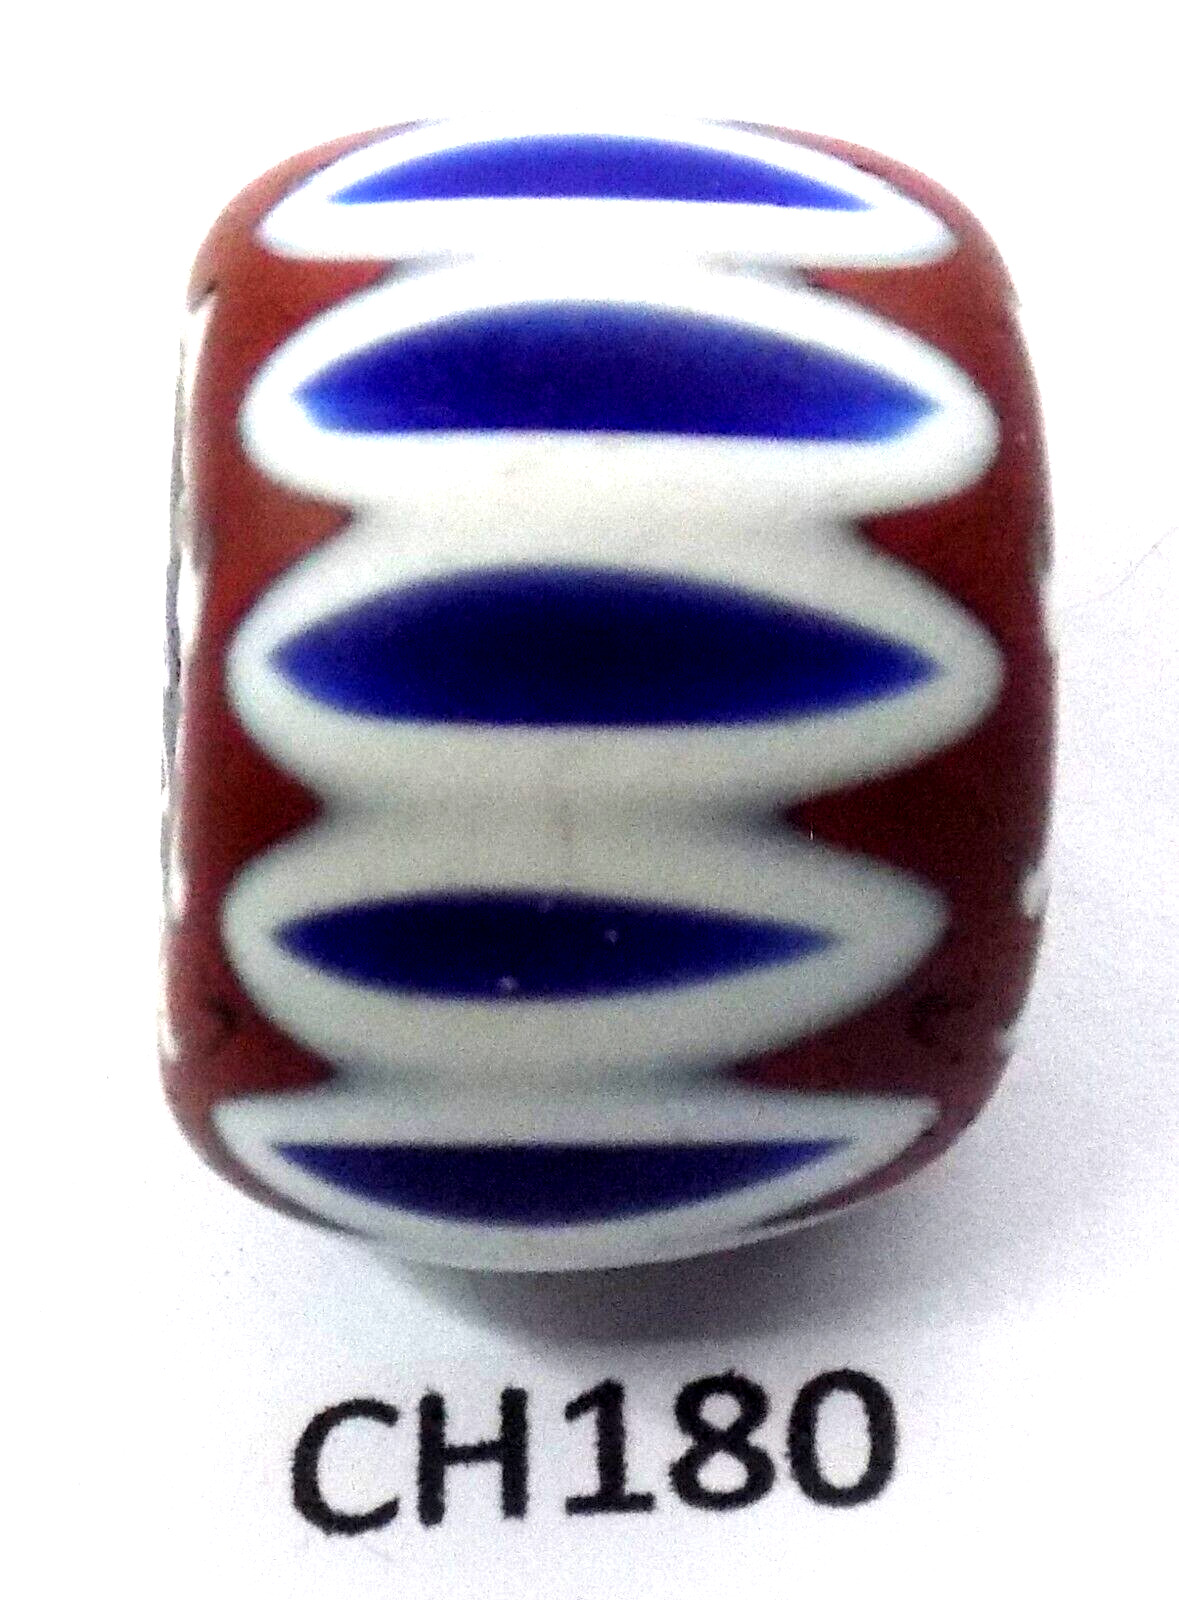 Large Venetian African Trade Bead  Howard Collection CH180   Bg 62